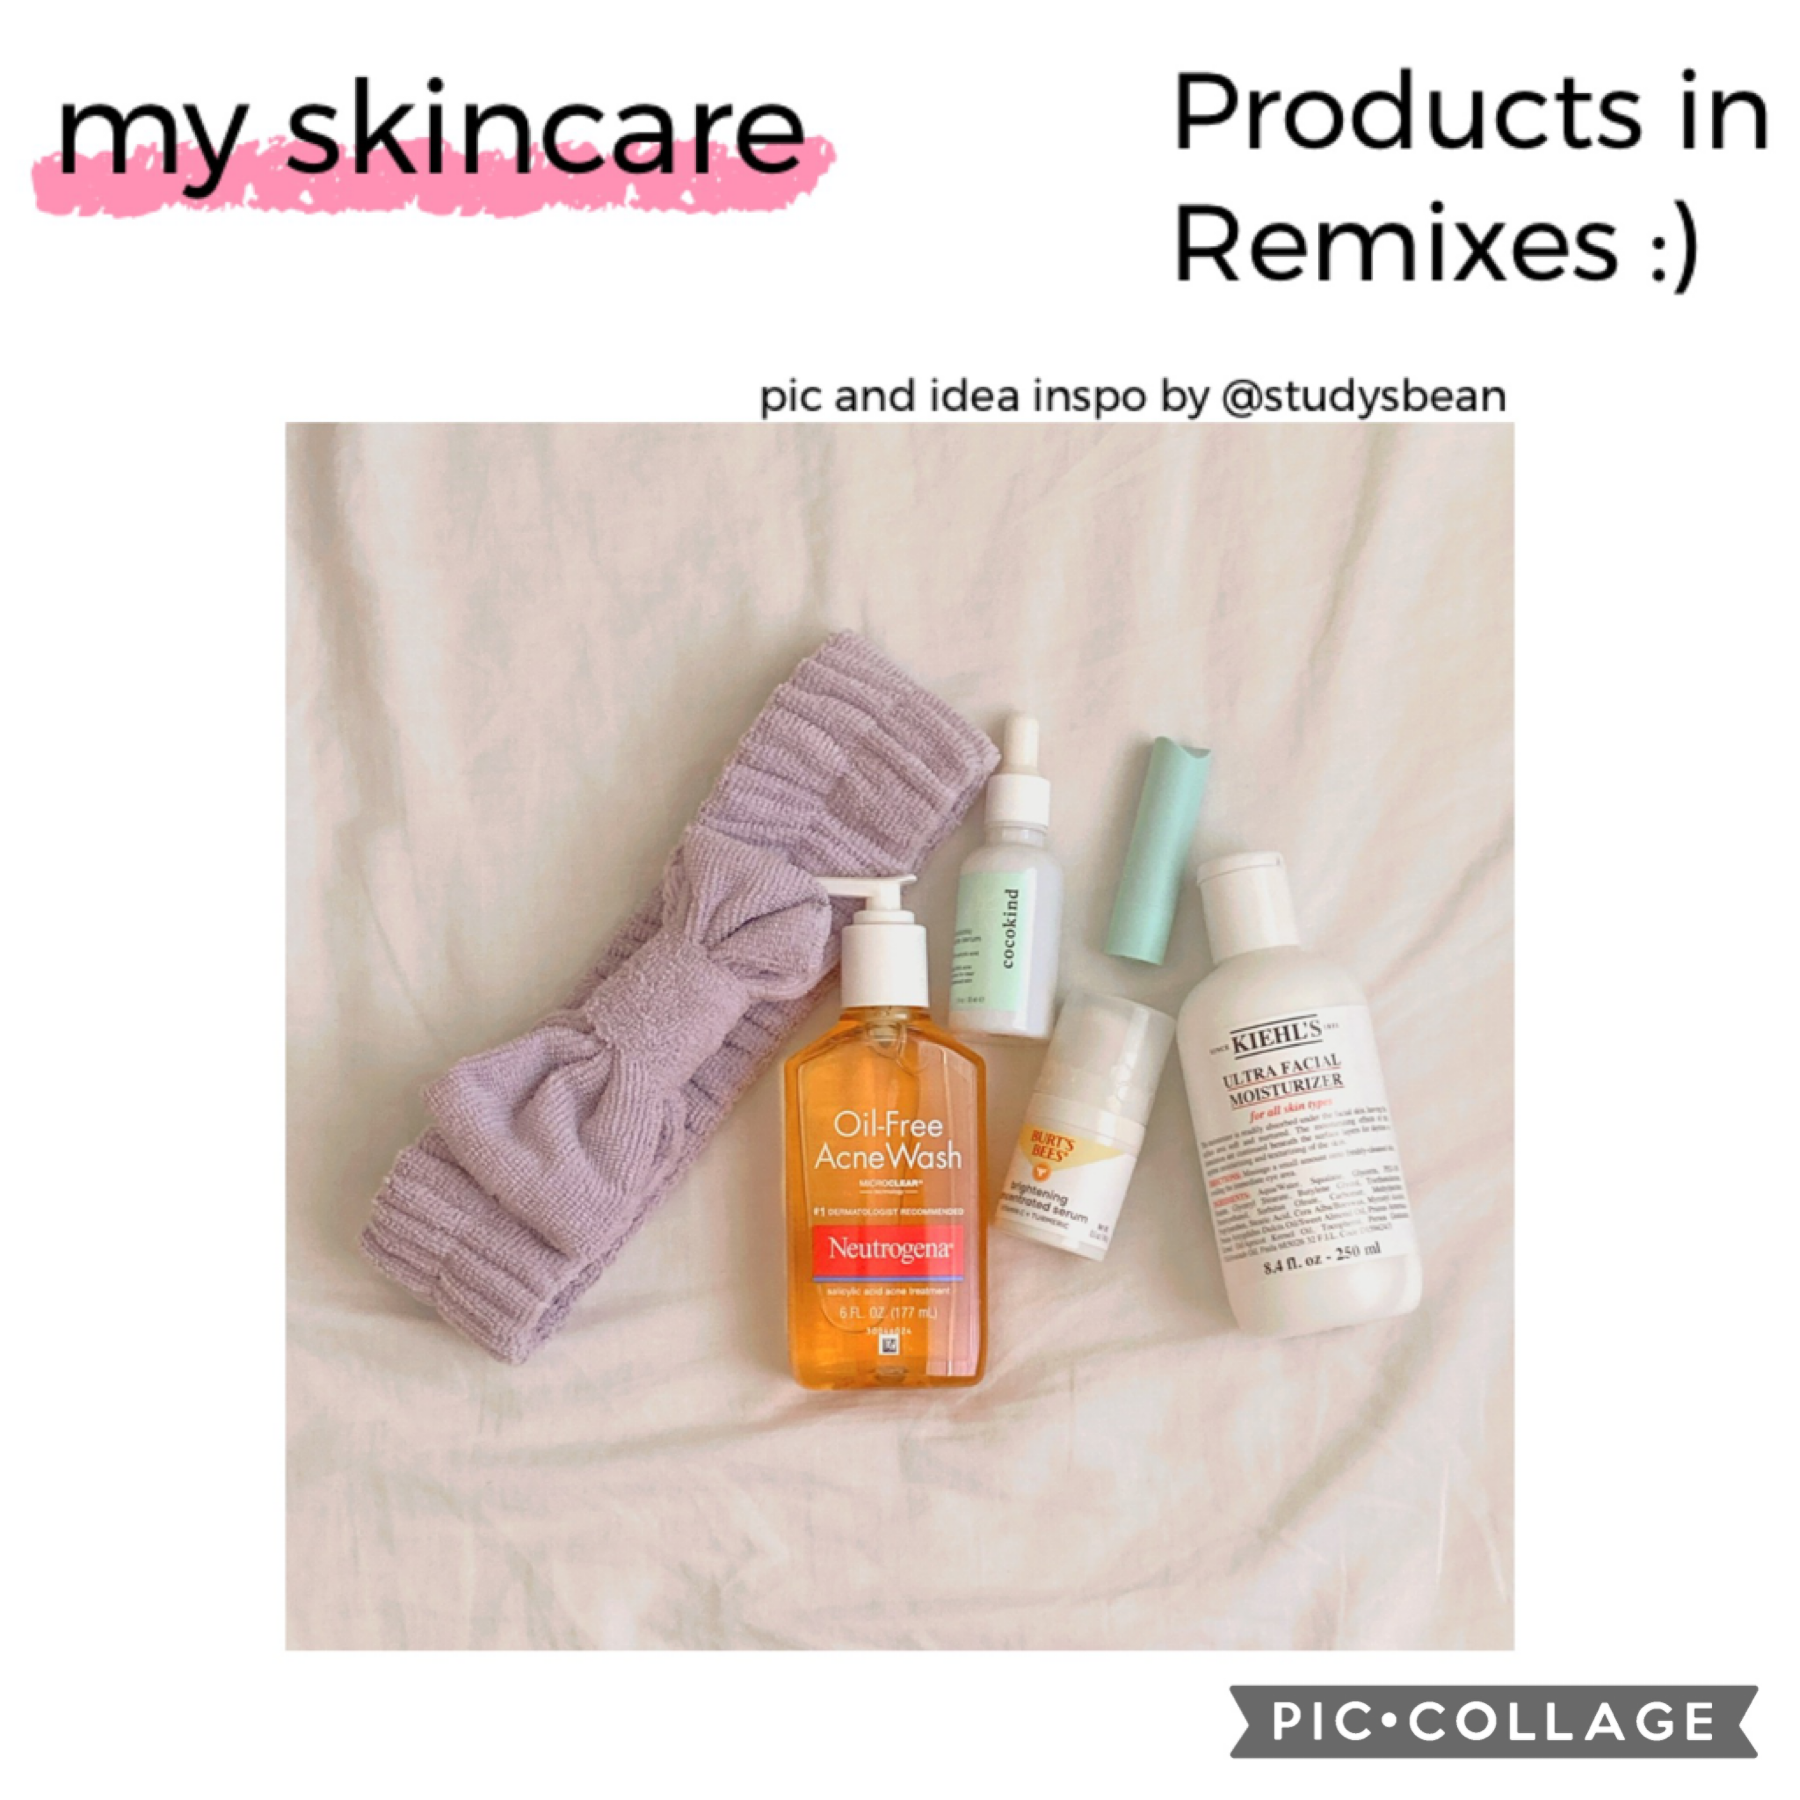 『boop me』
My skincare routine! I thought it would be fun to post here 🌿🌞🧴💅
Products are in remixes, as well as a little info about my skin so you can know if these might work for you!!